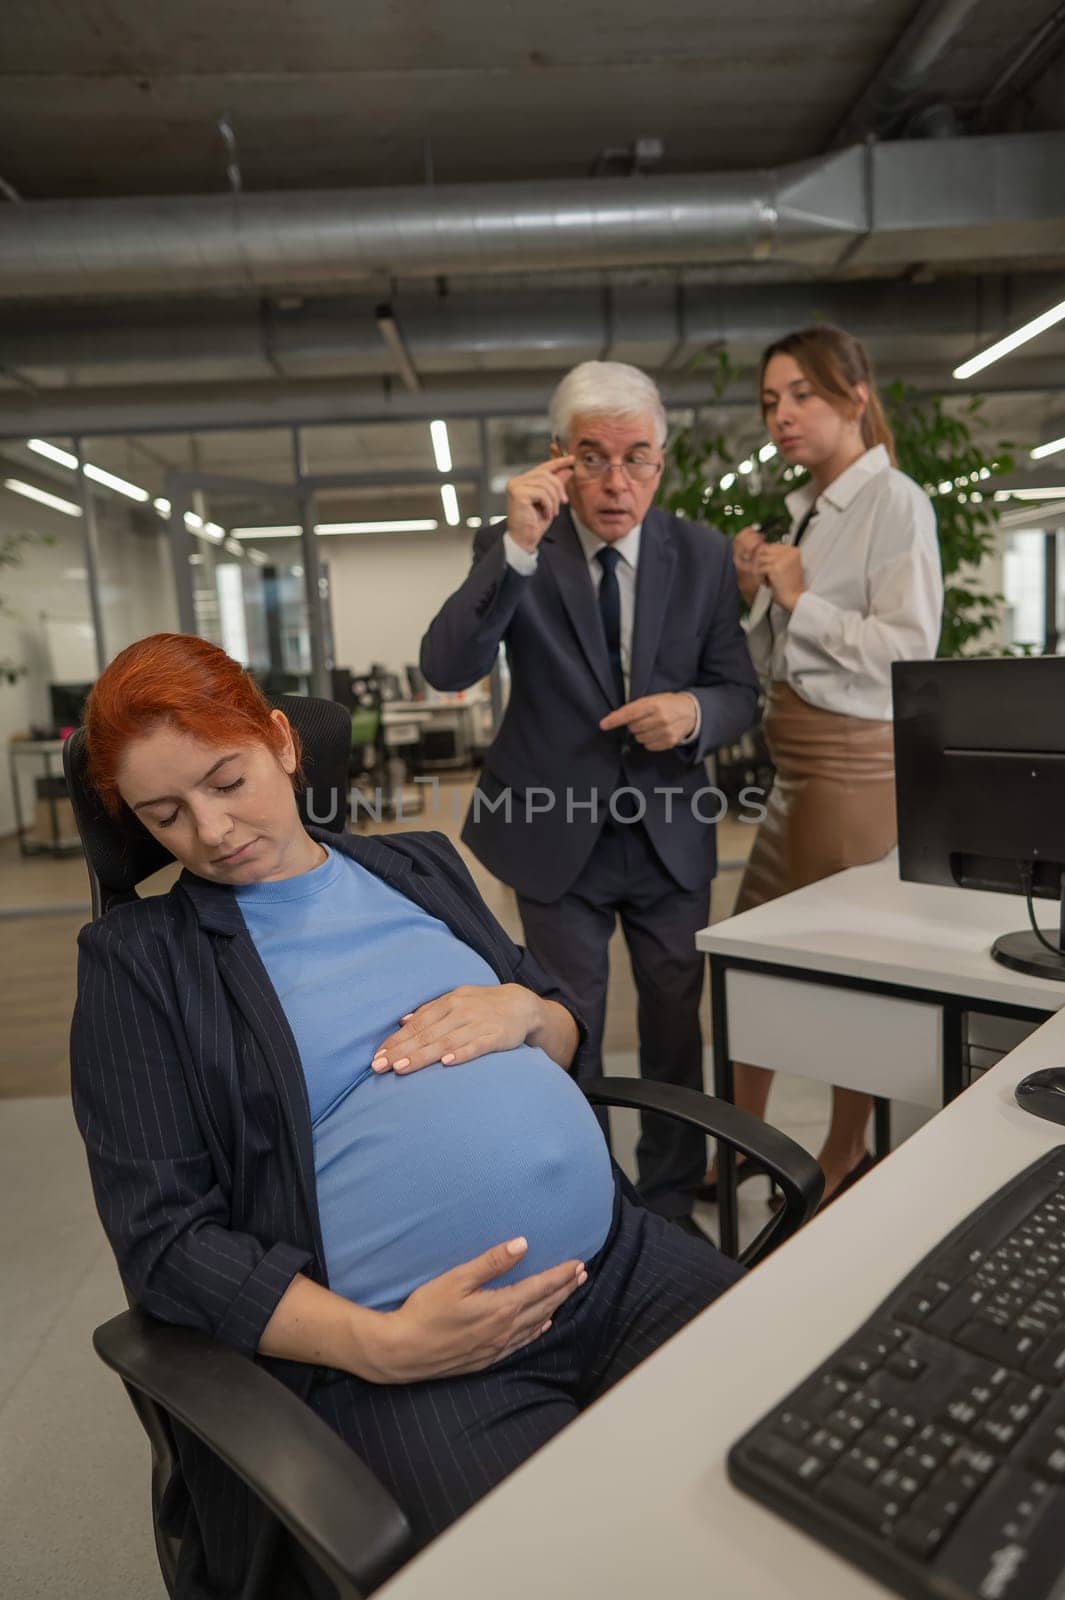 Elderly Caucasian man and woman gossiping behind their sleeping pregnant colleague in the office. Vertical photo